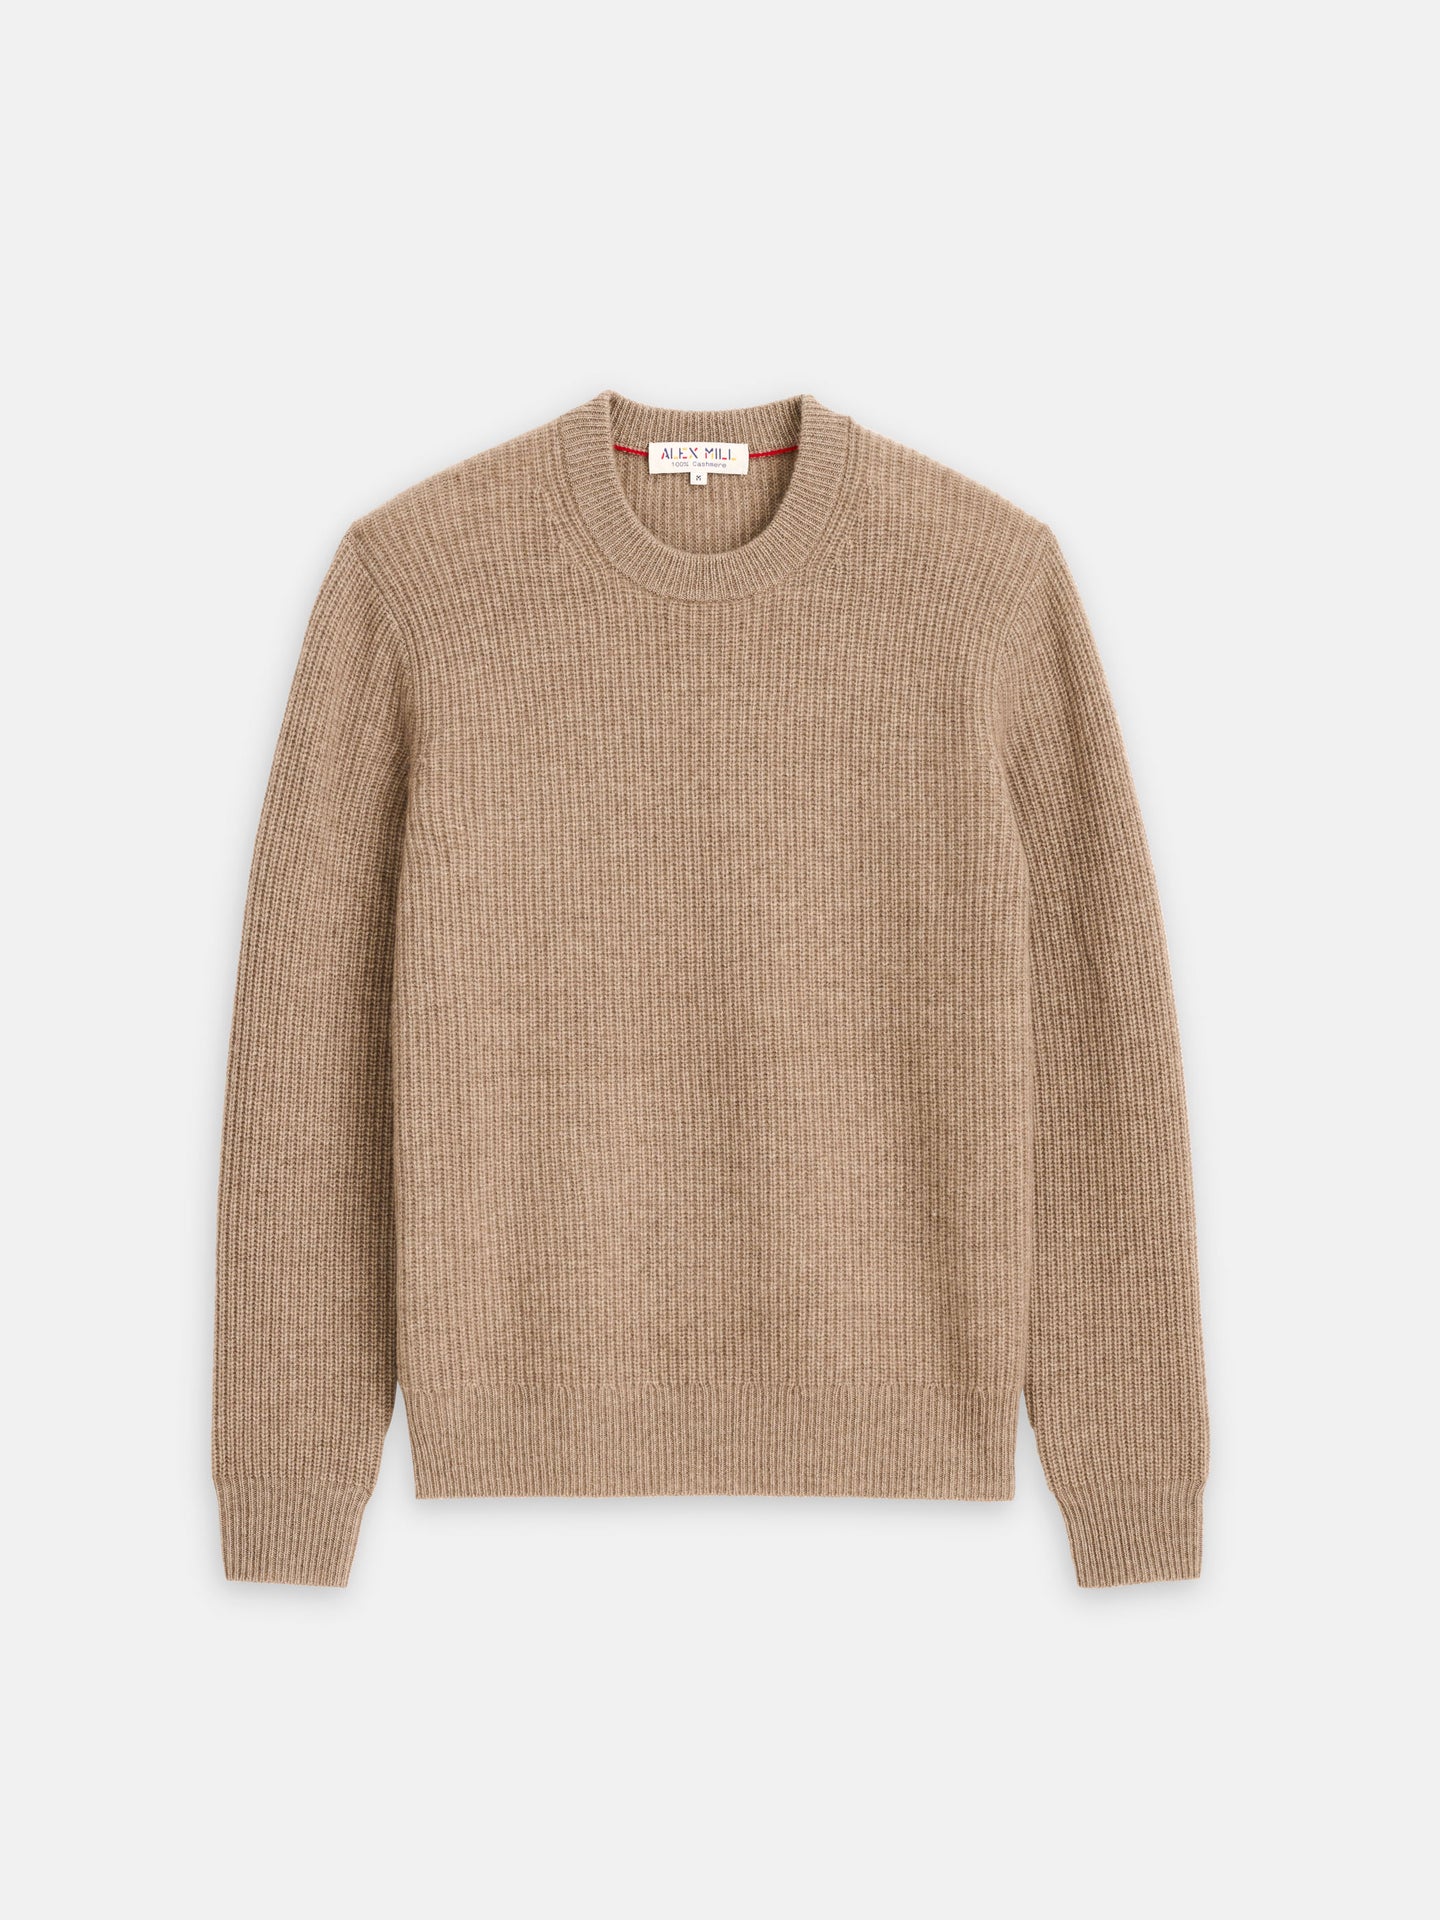 Jordan Sweater in Washed Cashmere Taupe